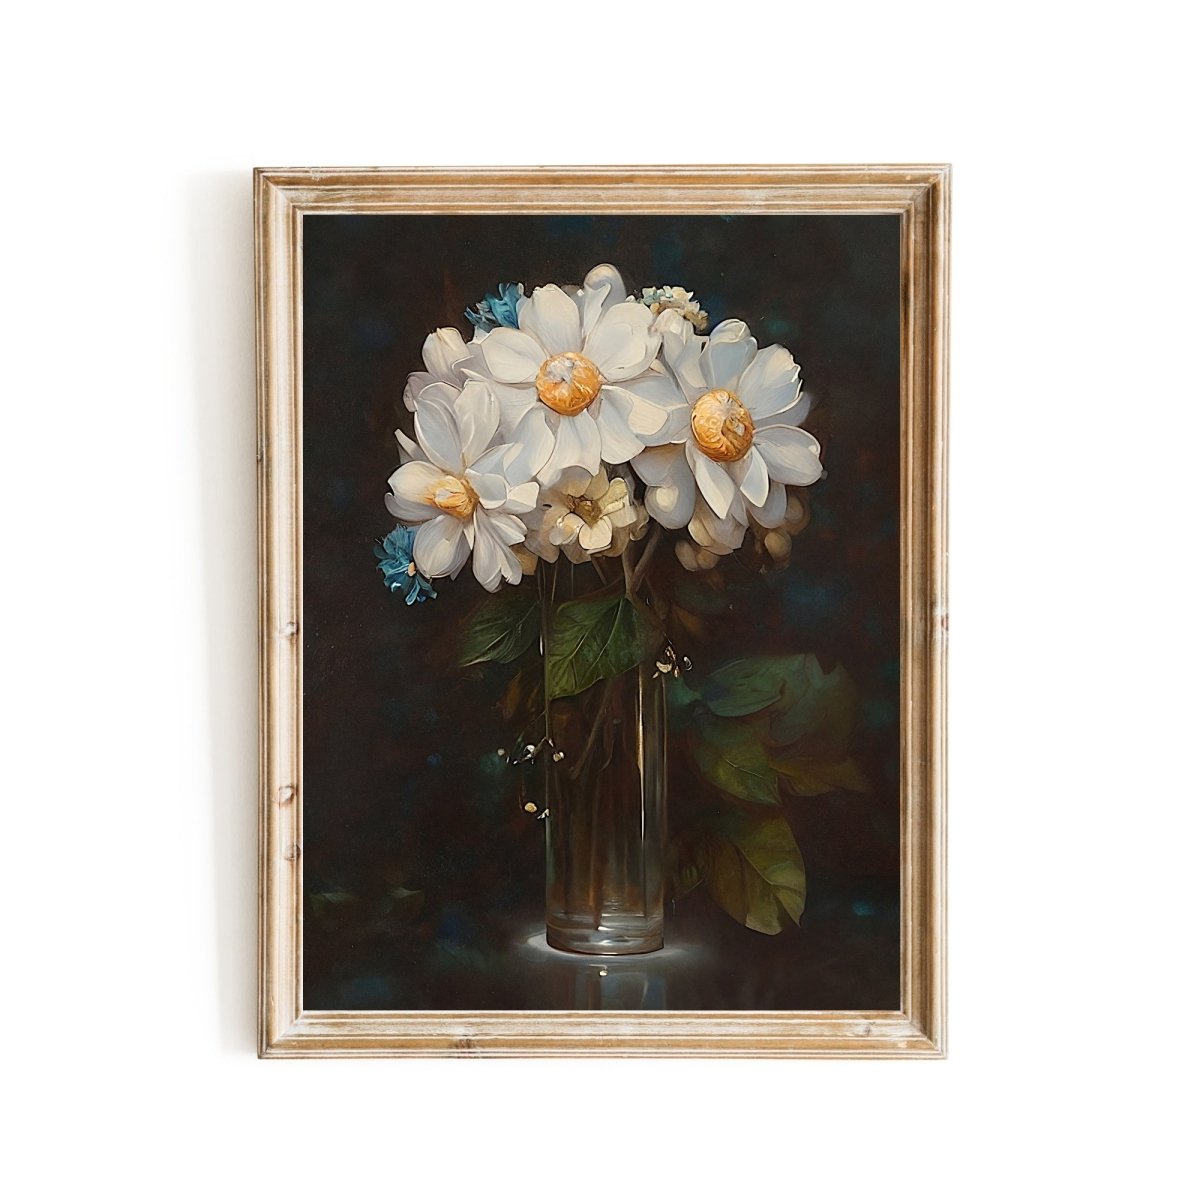 Blooming flowers in glasvase on table still life painting vintage farmhouse decor - Everything Pixel